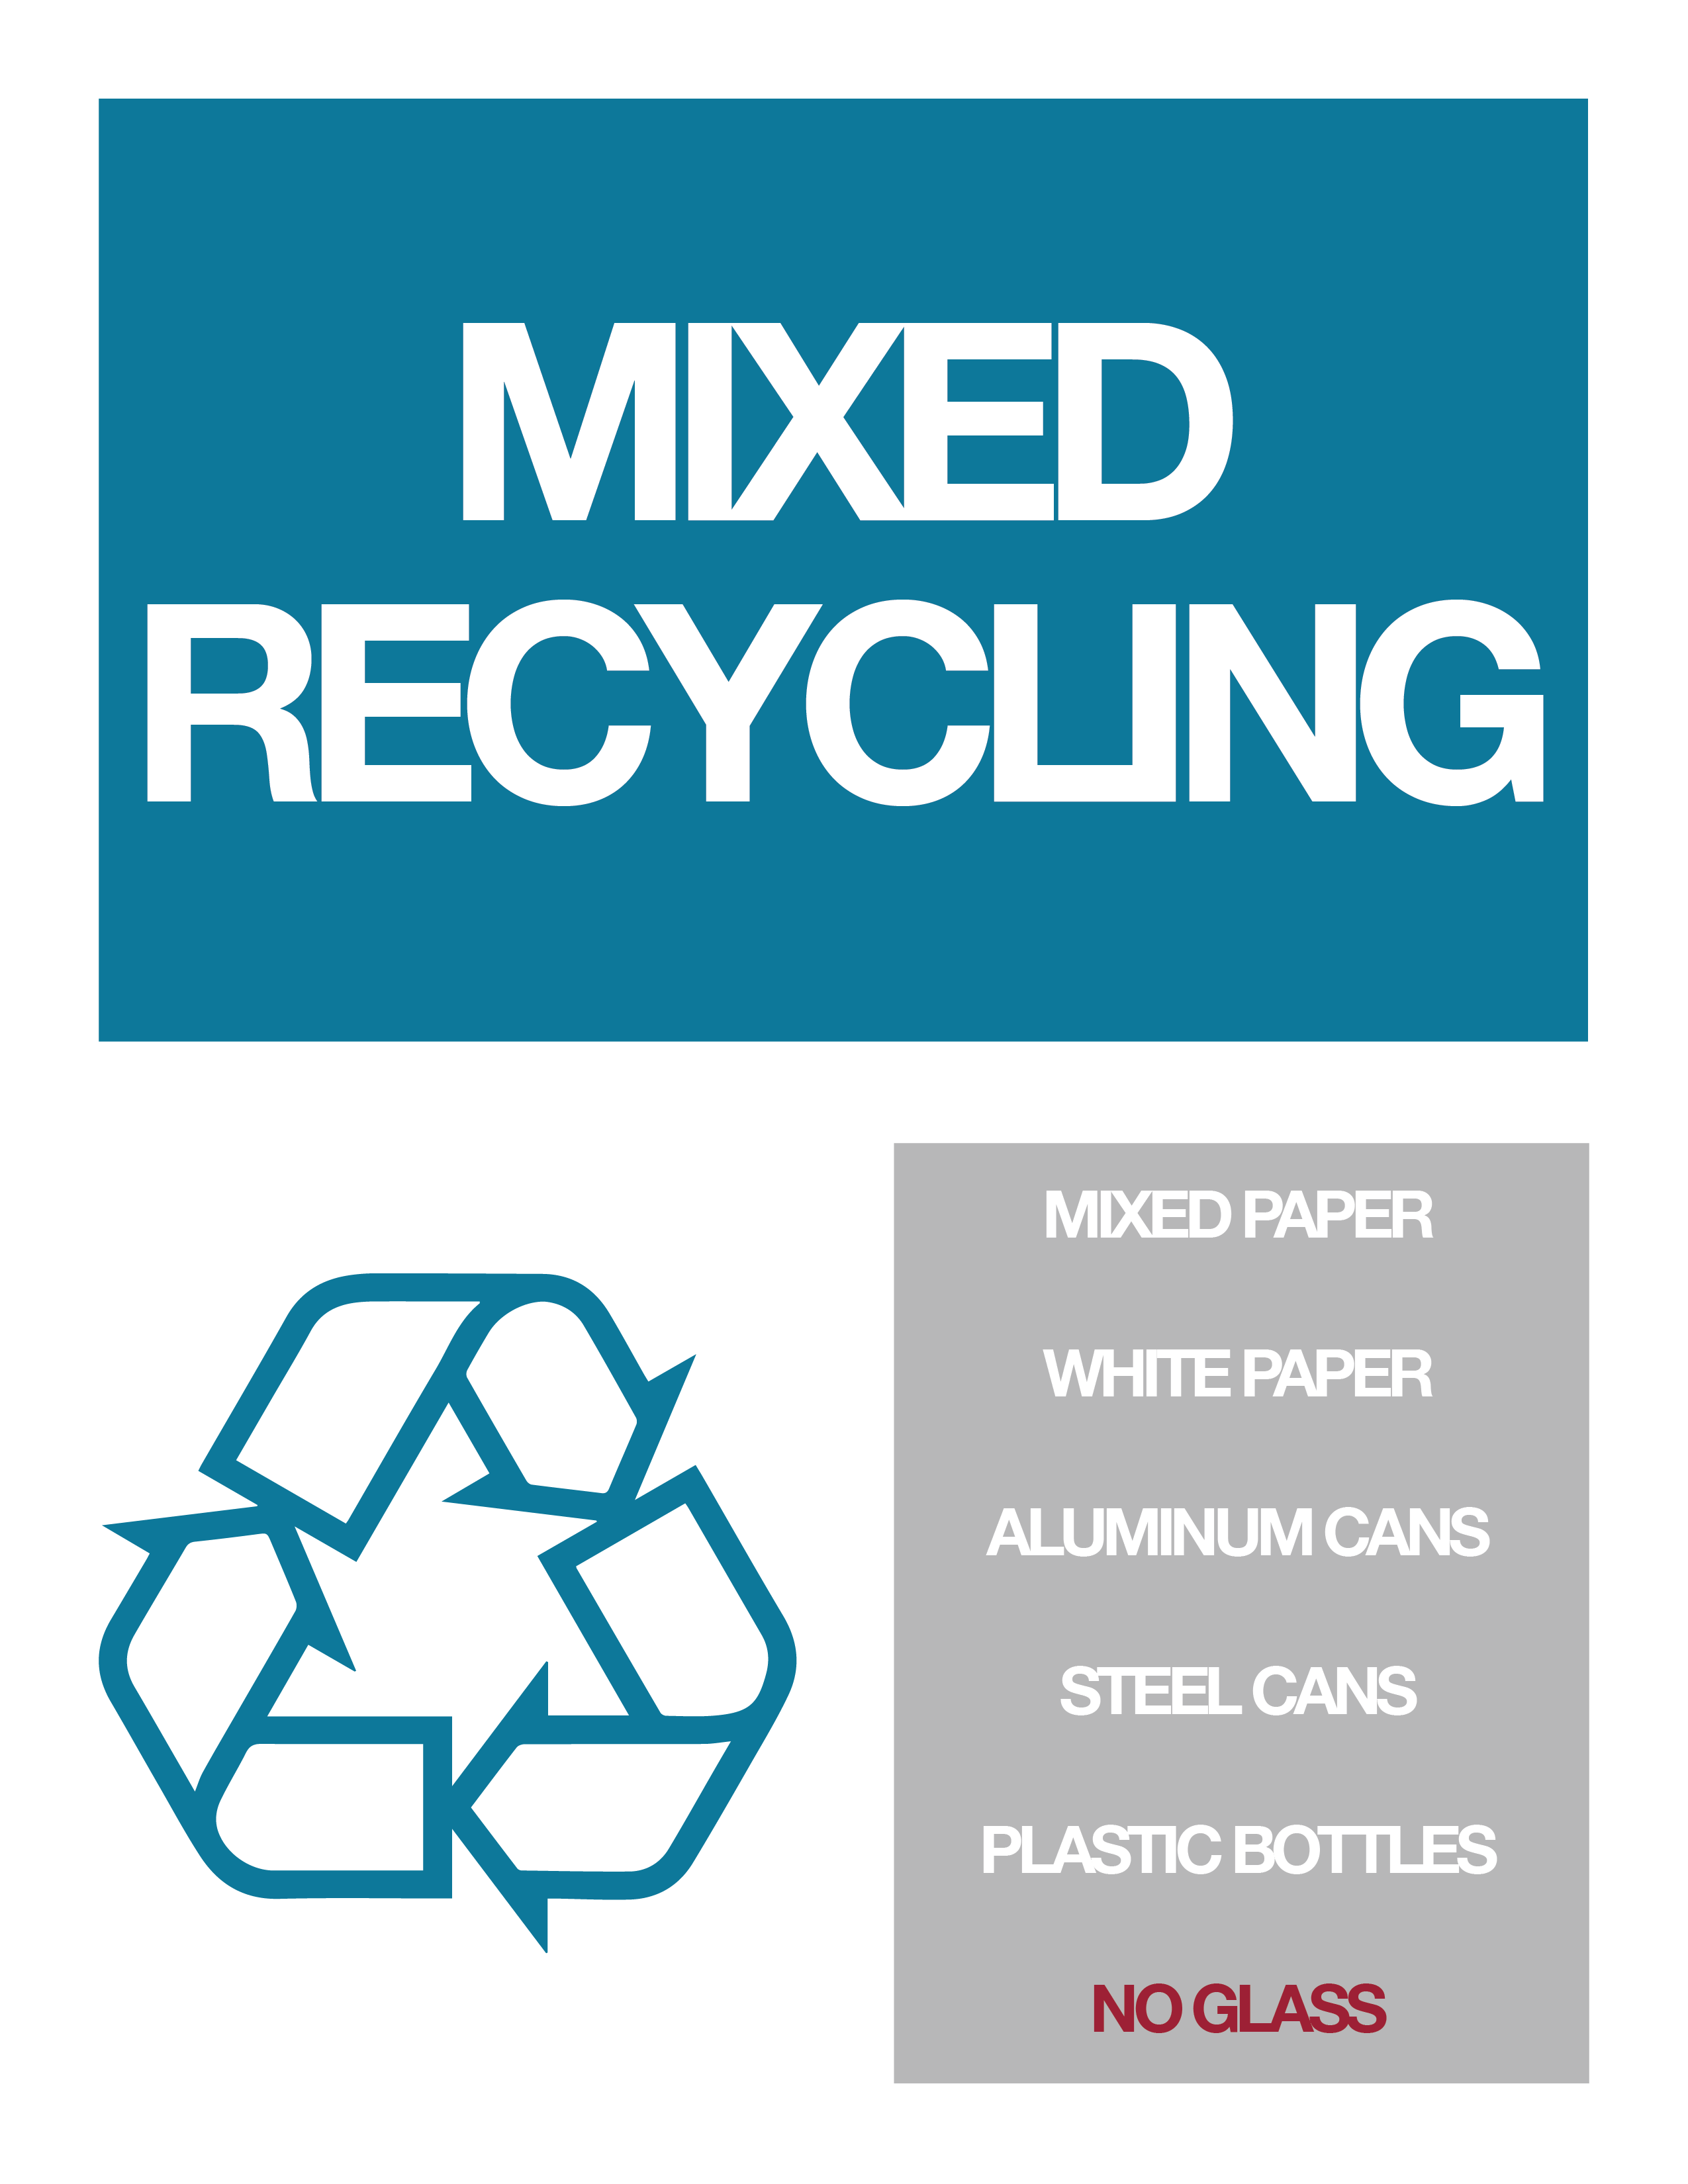 mixed recycling